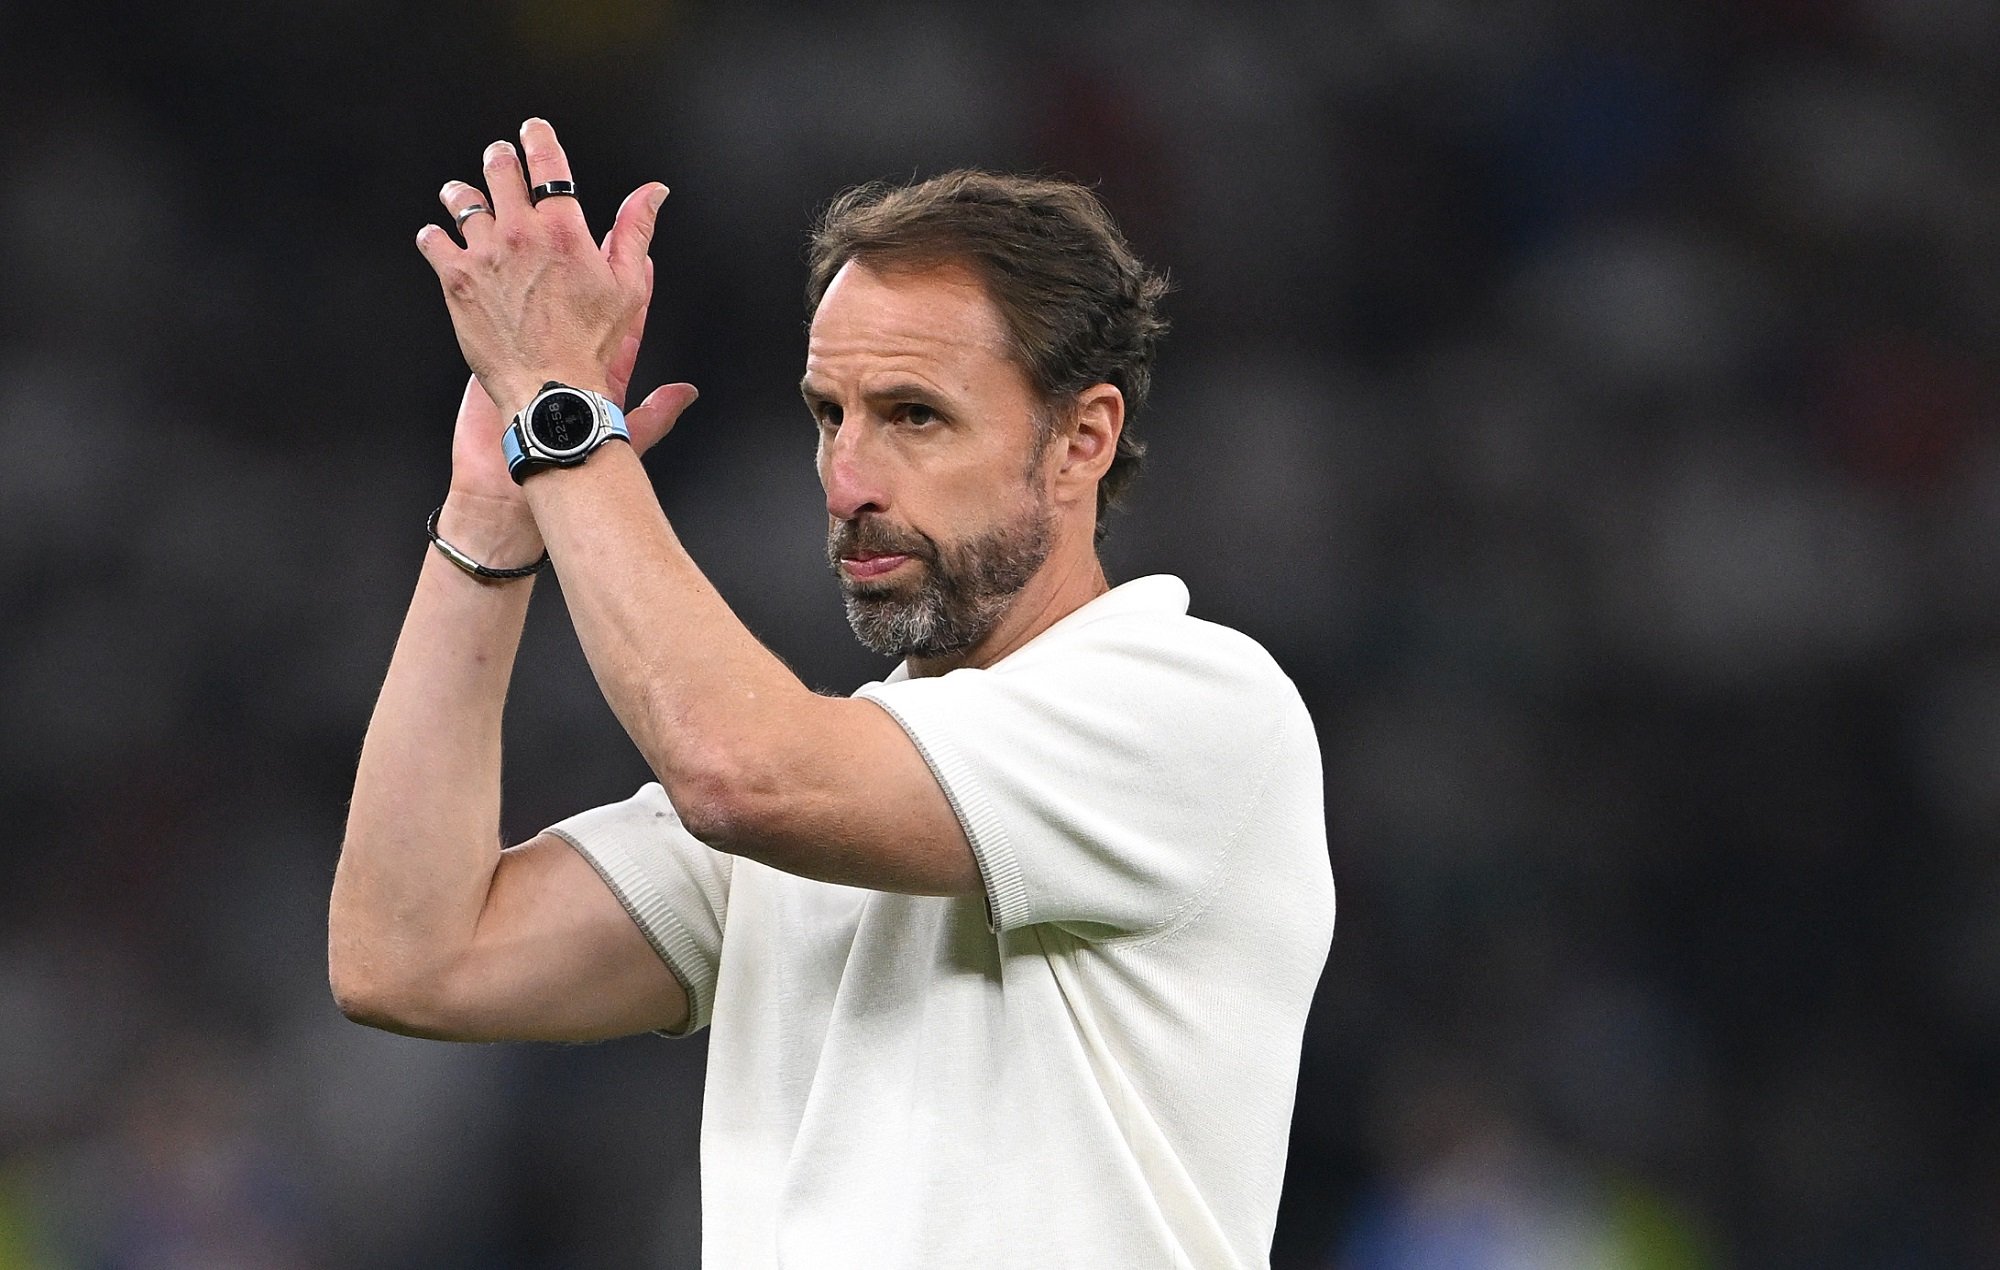 Entertainment world reacts to England manager Gareth Southgate stepping down